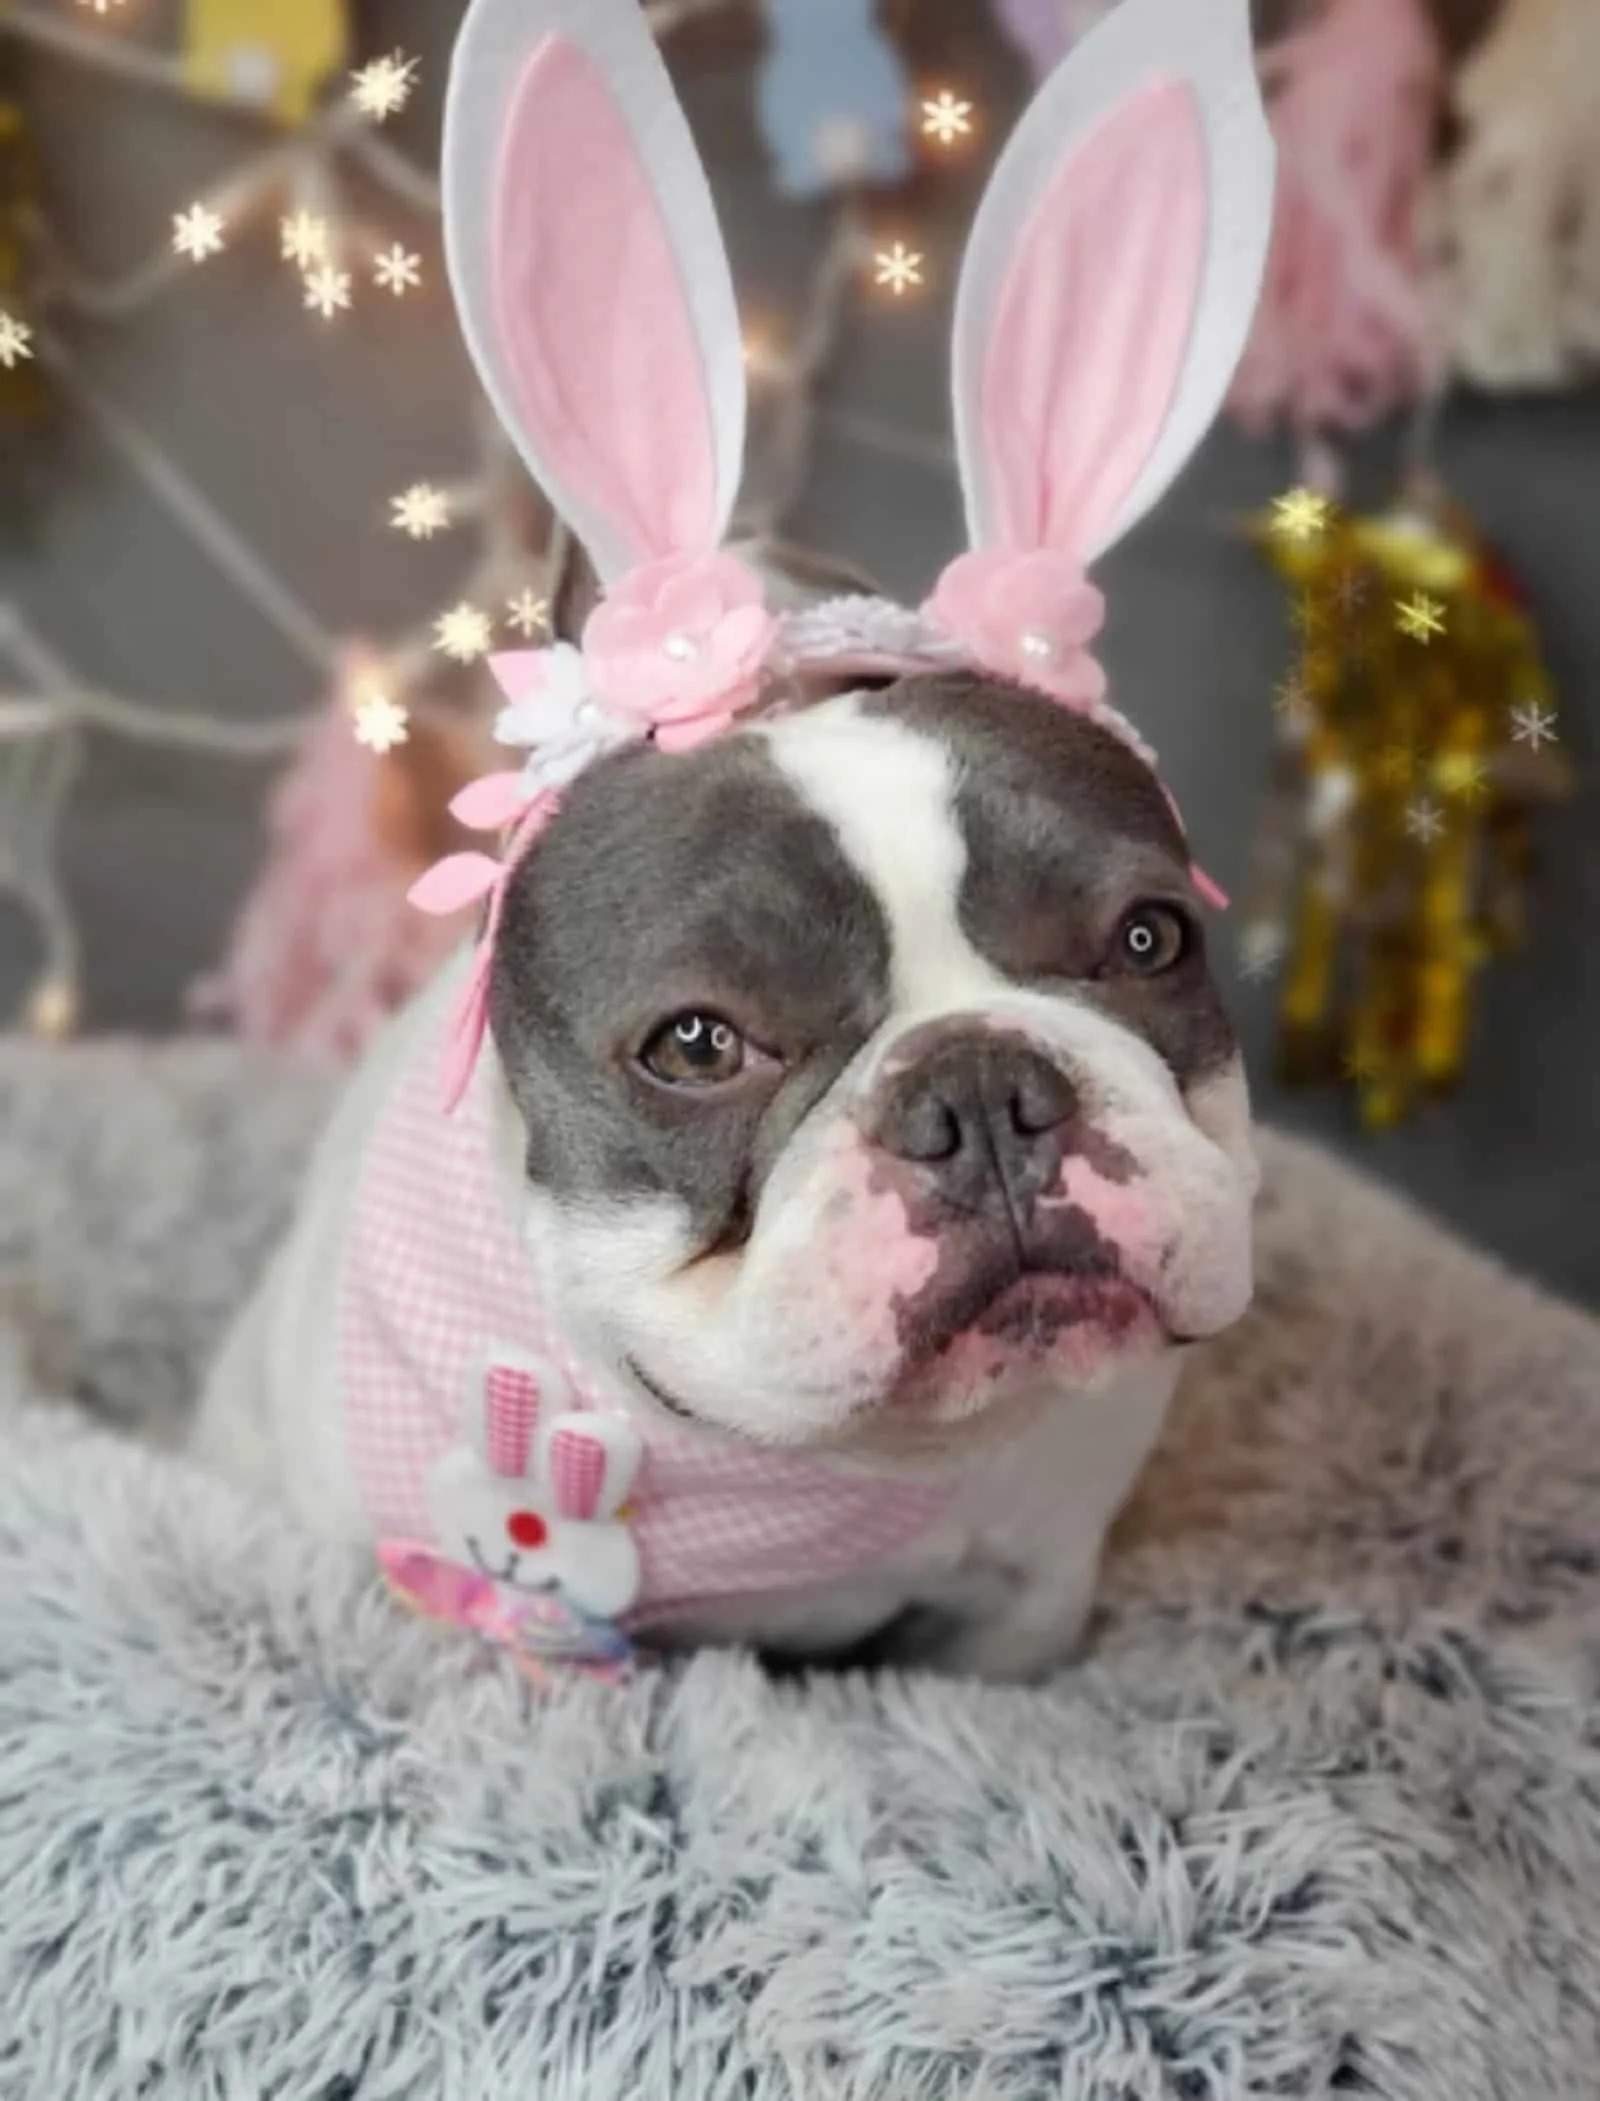 bully wearing easter outfit sitting on the bed